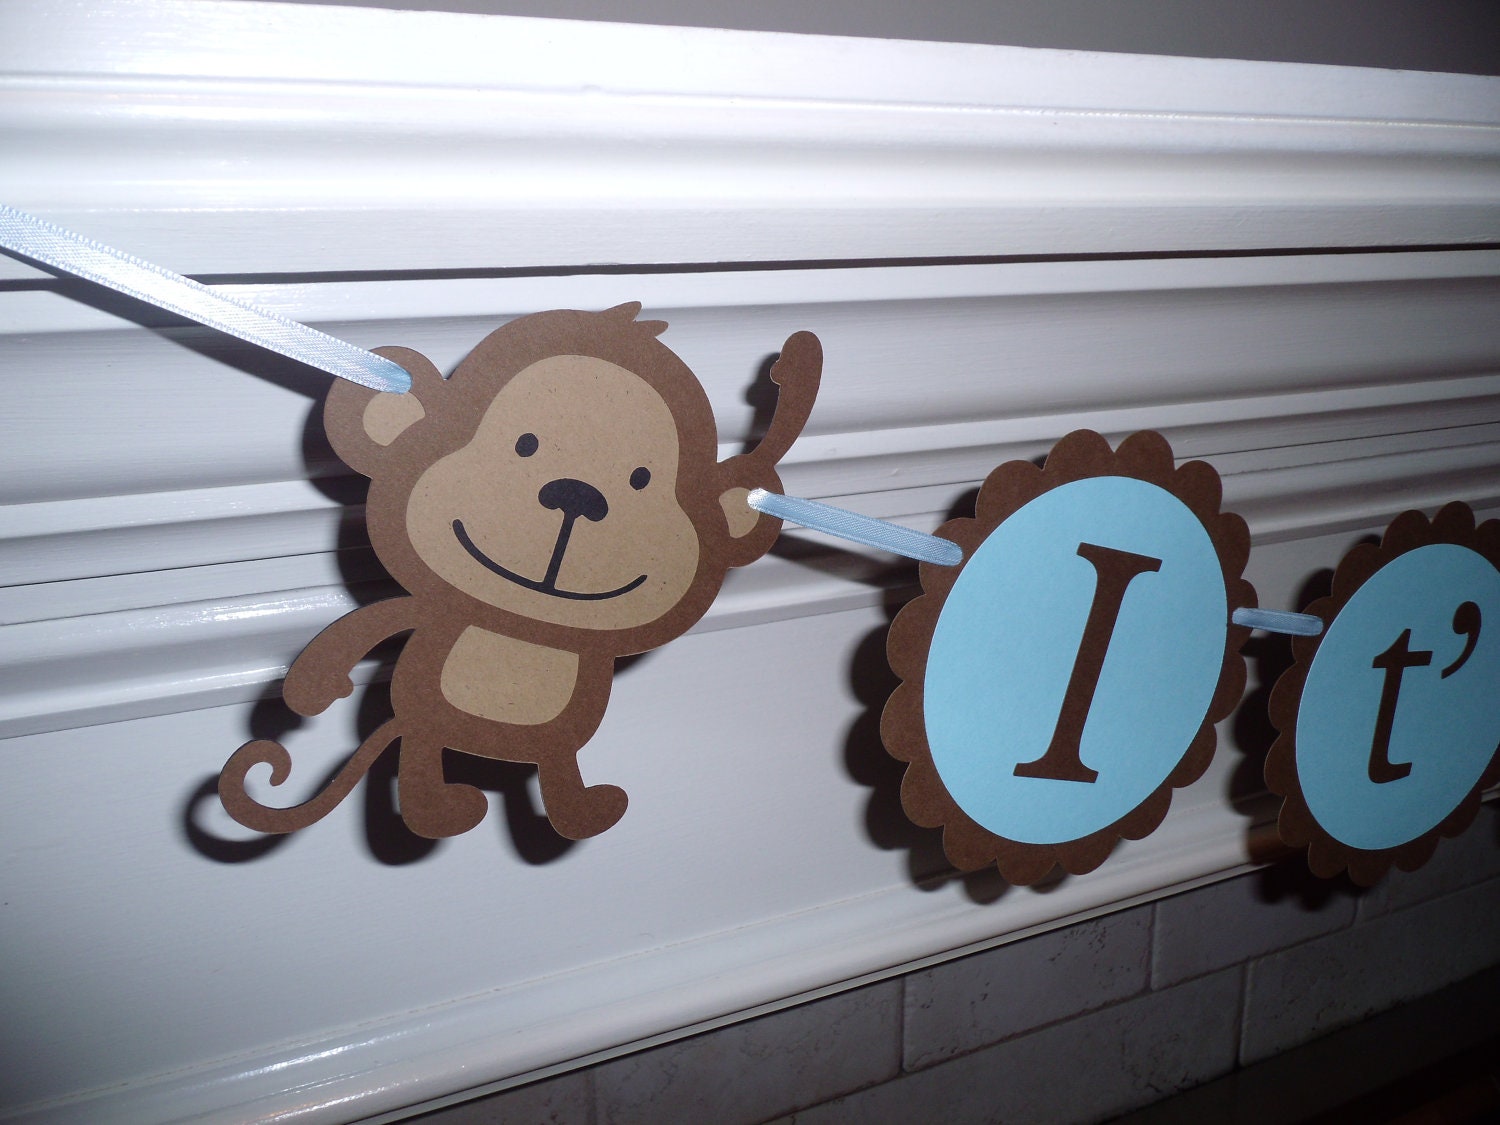 Popular items for new baby decorations on Etsy